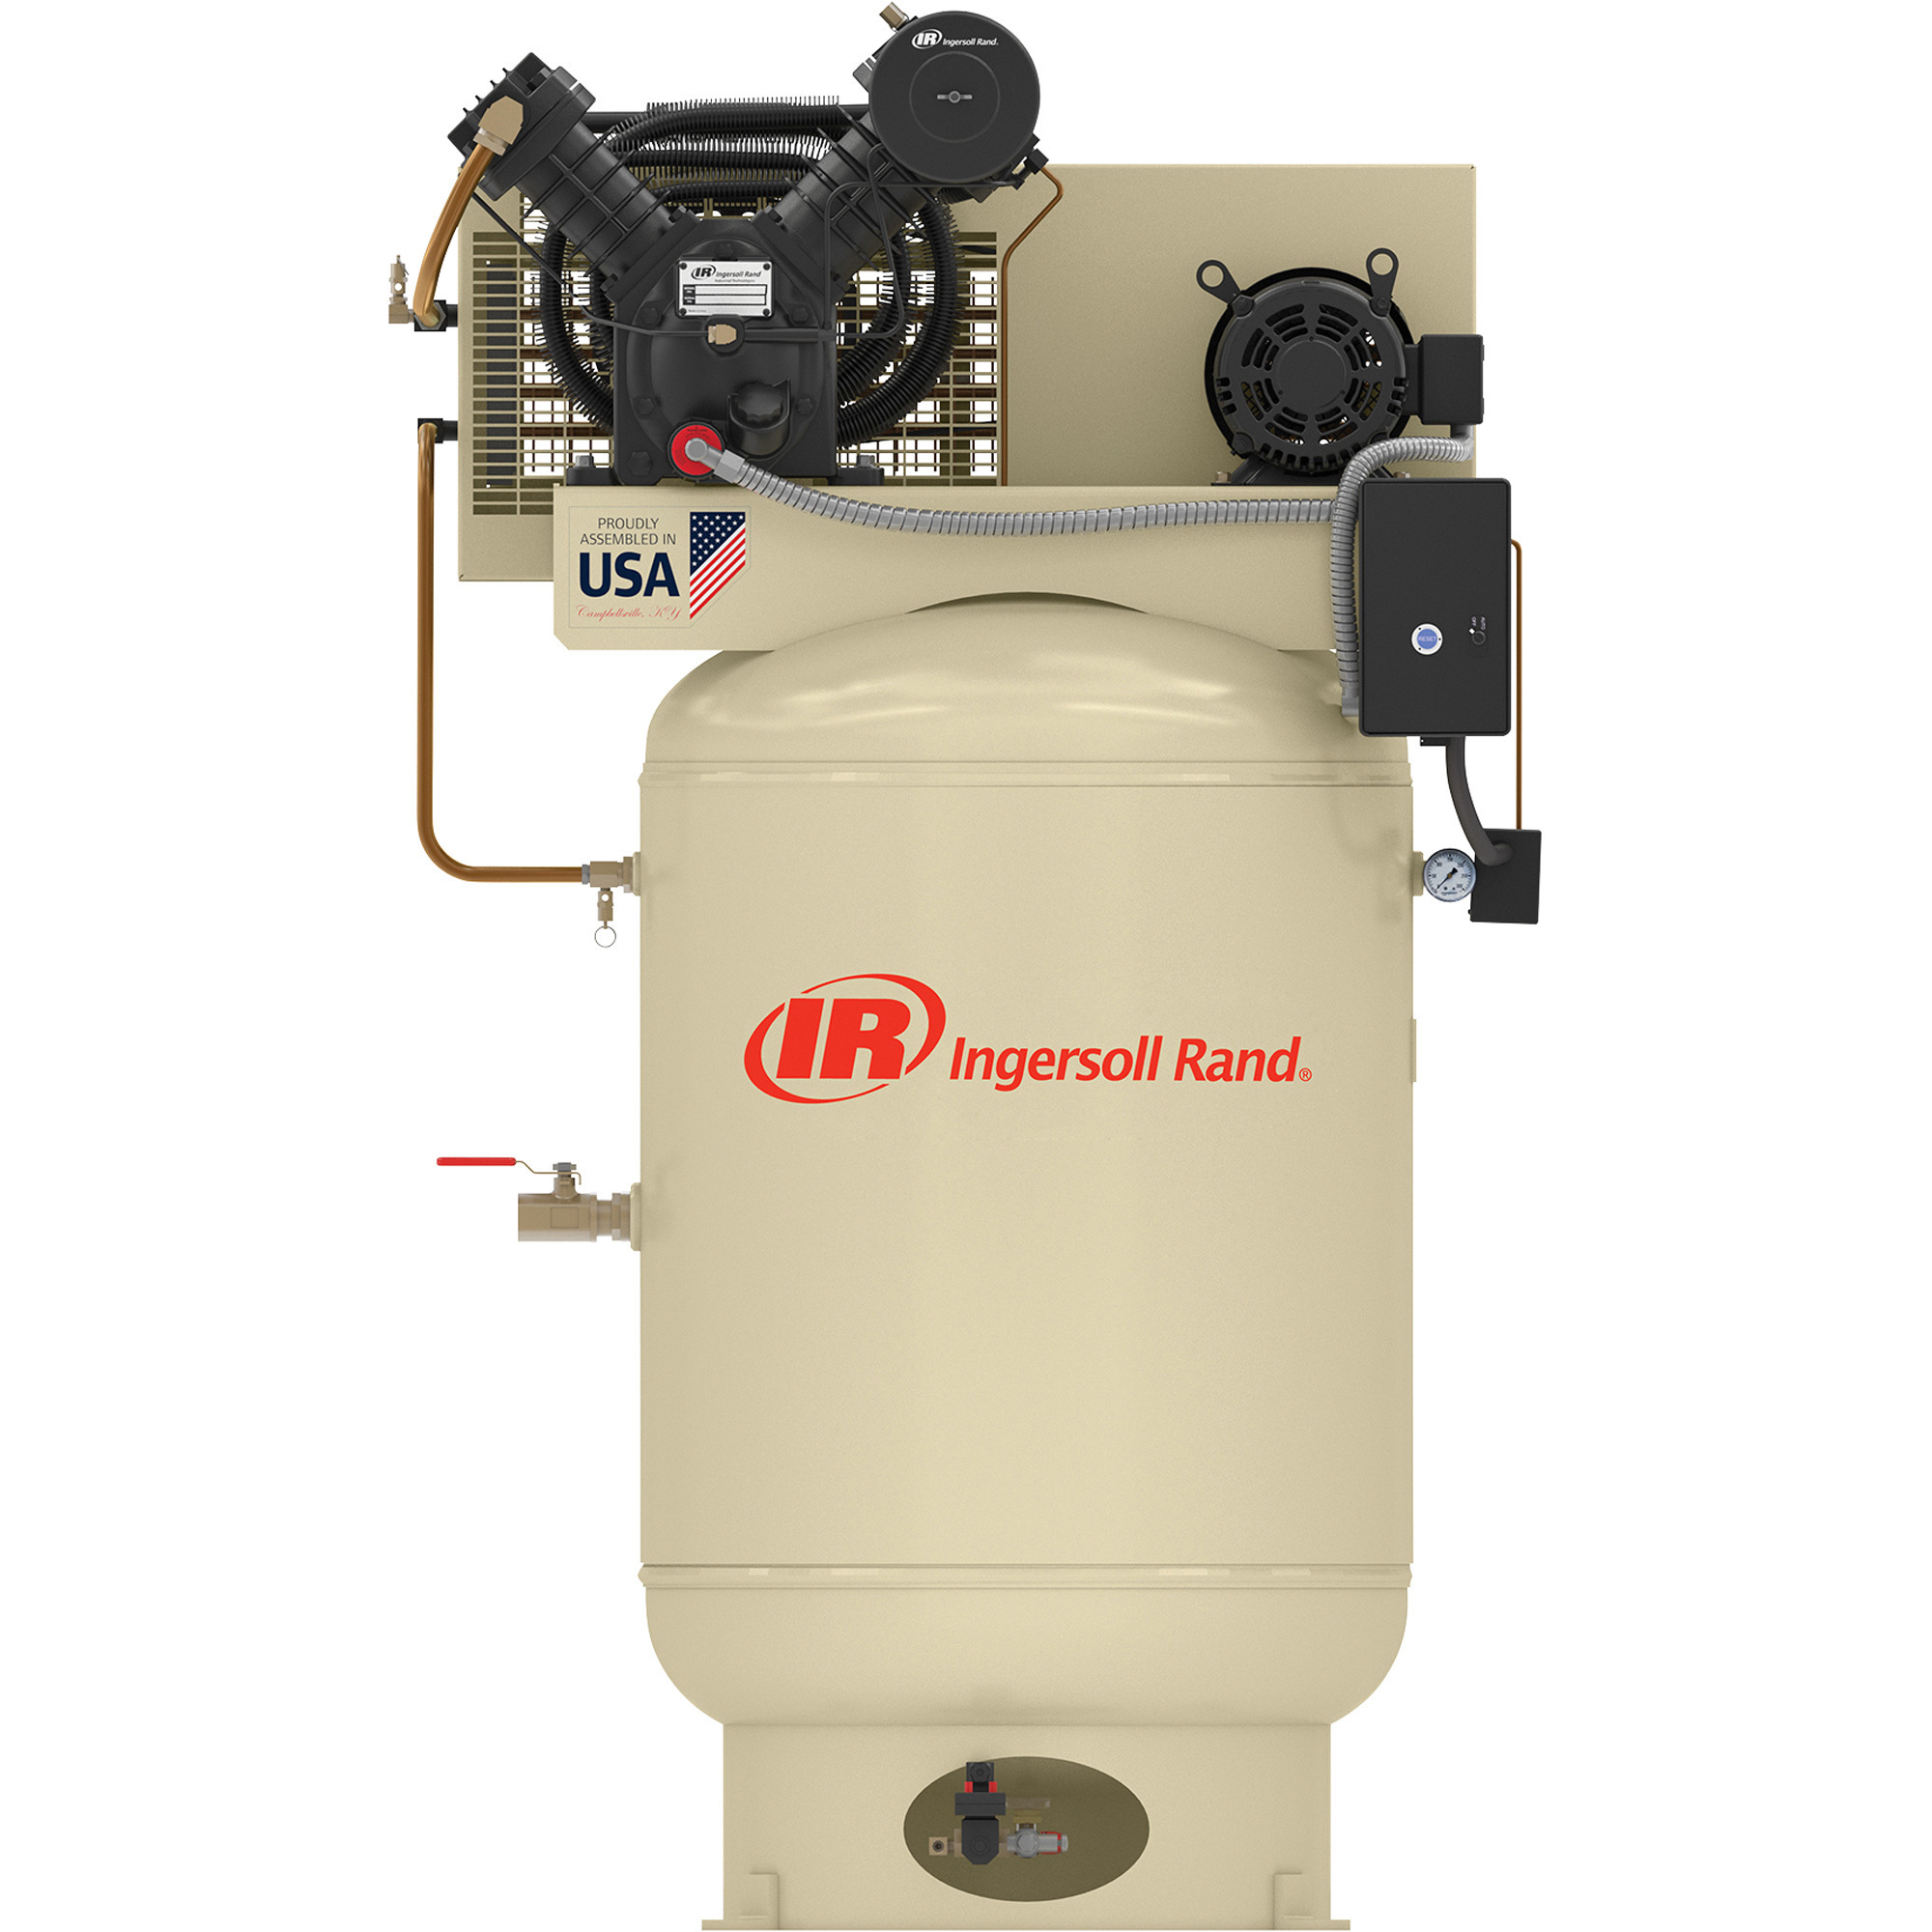 Ingersoll Rand Electric Stationary Air Compressor (Premium Package), 10 HP, 230 Volts, 3 Phase, 120 Gallon Vertical, 35 CFM At 175 PSI, Model 2545K10-